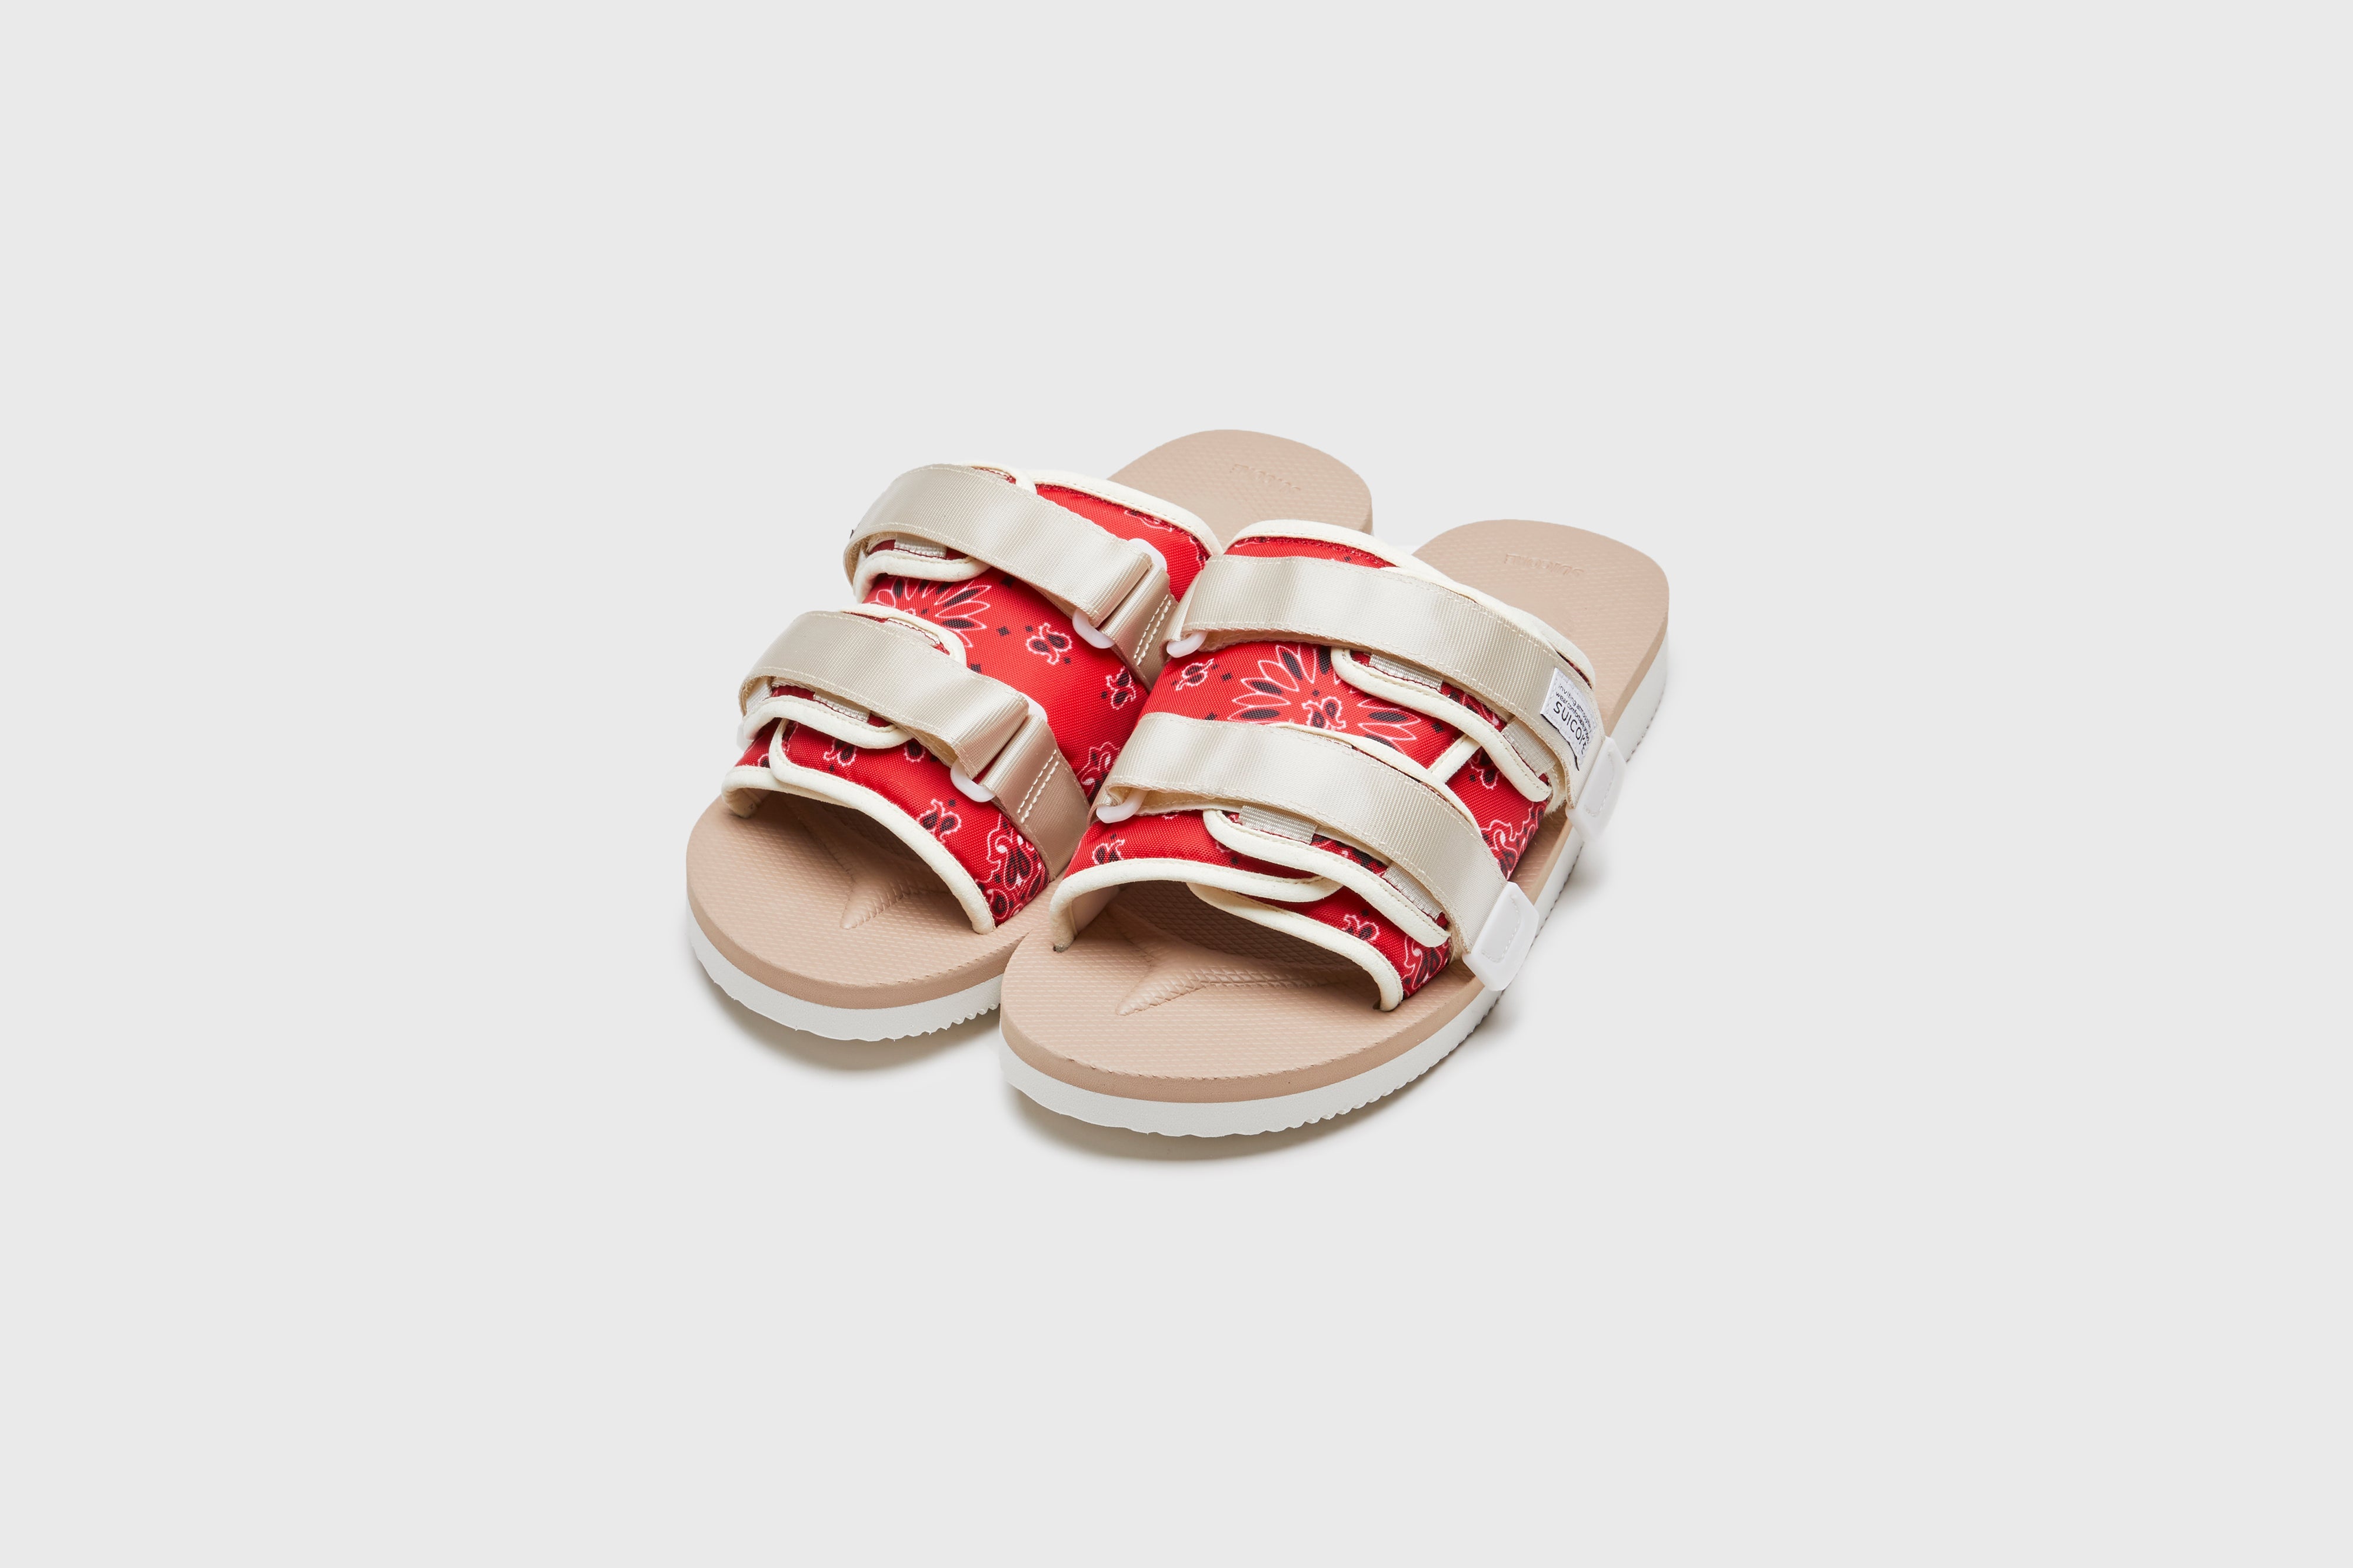 SUICOKE MOTO-Cab-PT05 slides with red &amp; beige nylon upper, red &amp; beige midsole and sole, strap and logo patch. From Spring/Summer 2023 collection on eightywingold Web Store, an official partner of SUICOKE. OG-056CAB-PT05 RED X BEIGE